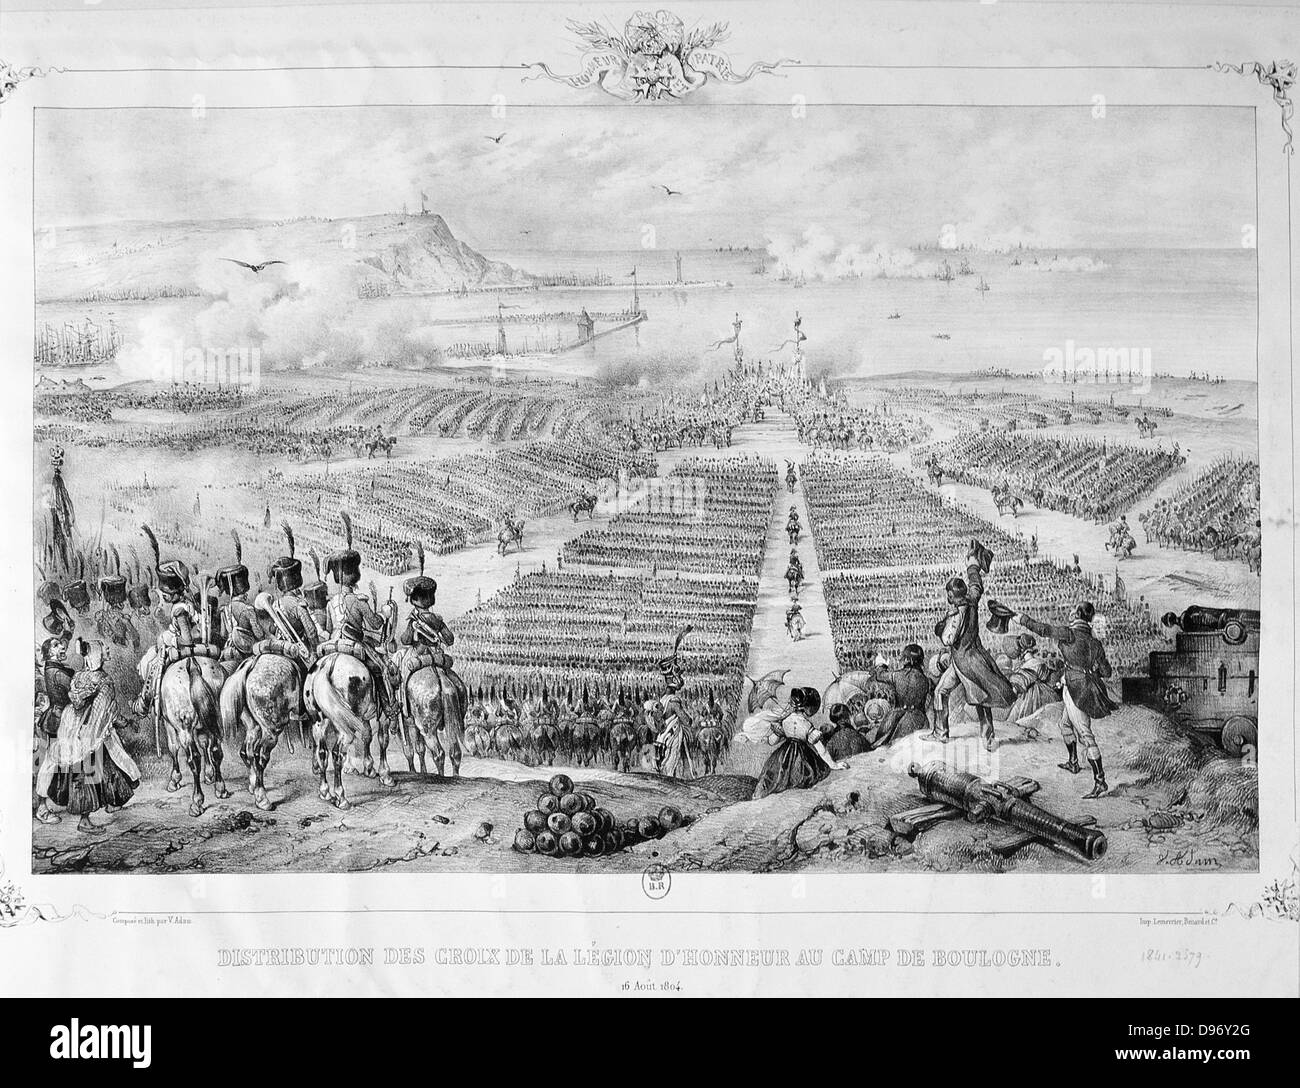 Distribution of the Cross of the Legion of Honour at Boulogne, 16 August 1804. Engraving. Stock Photo